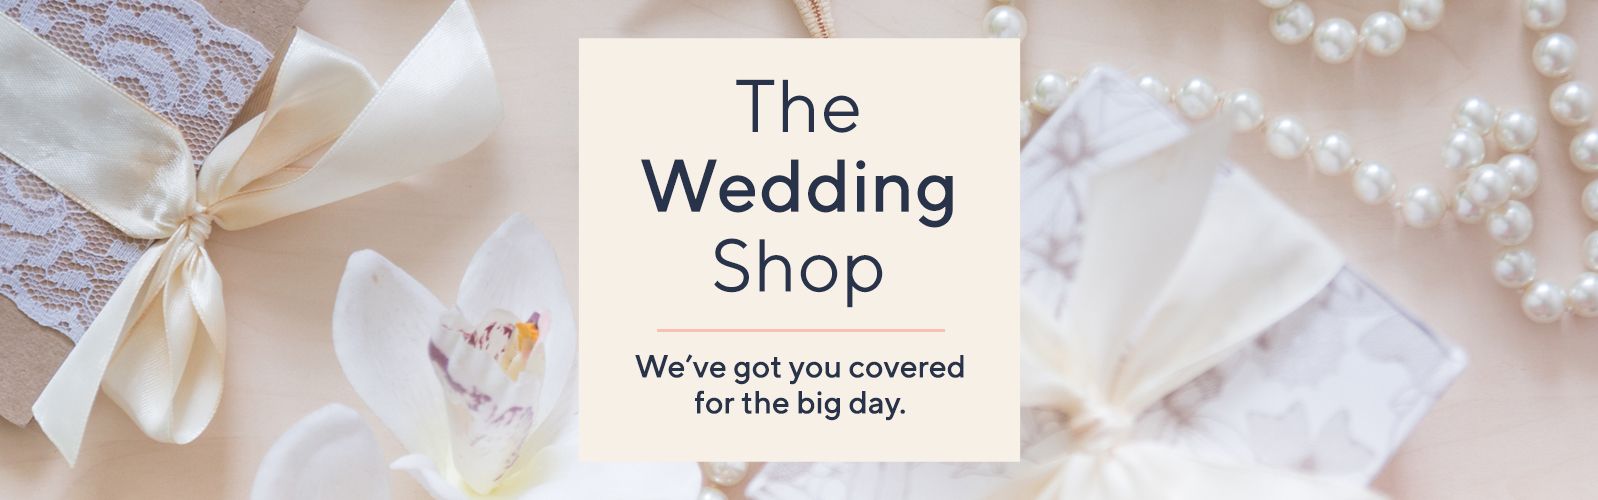 The Wedding Shop: We've got you covered for the big day.